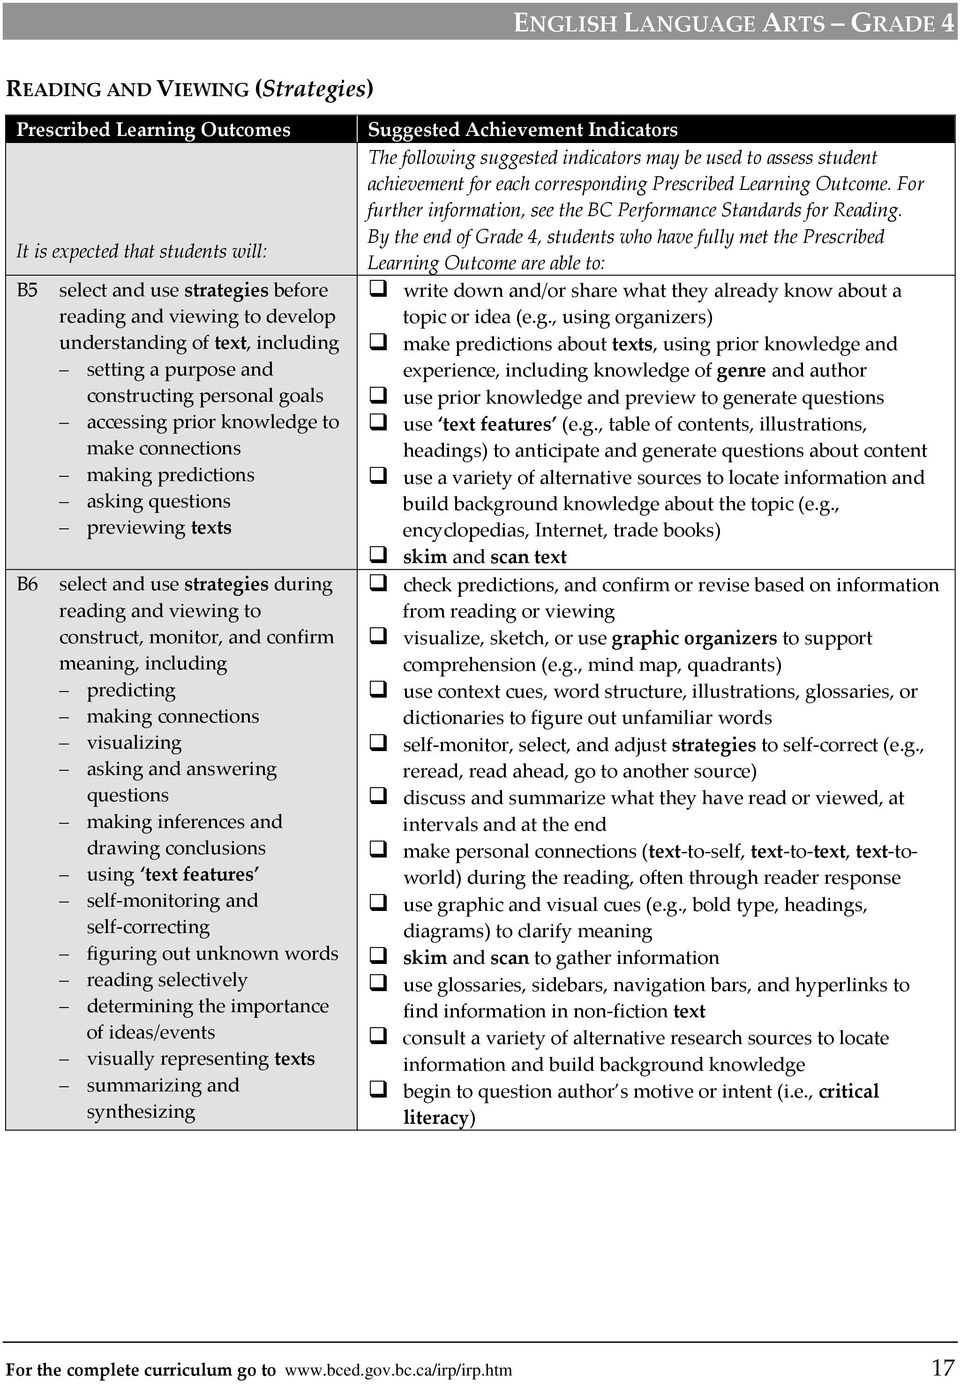 prior knowledge to make connections making predictions asking questions previewing texts select and use strategies during reading and viewing to construct, monitor, and confirm meaning, including